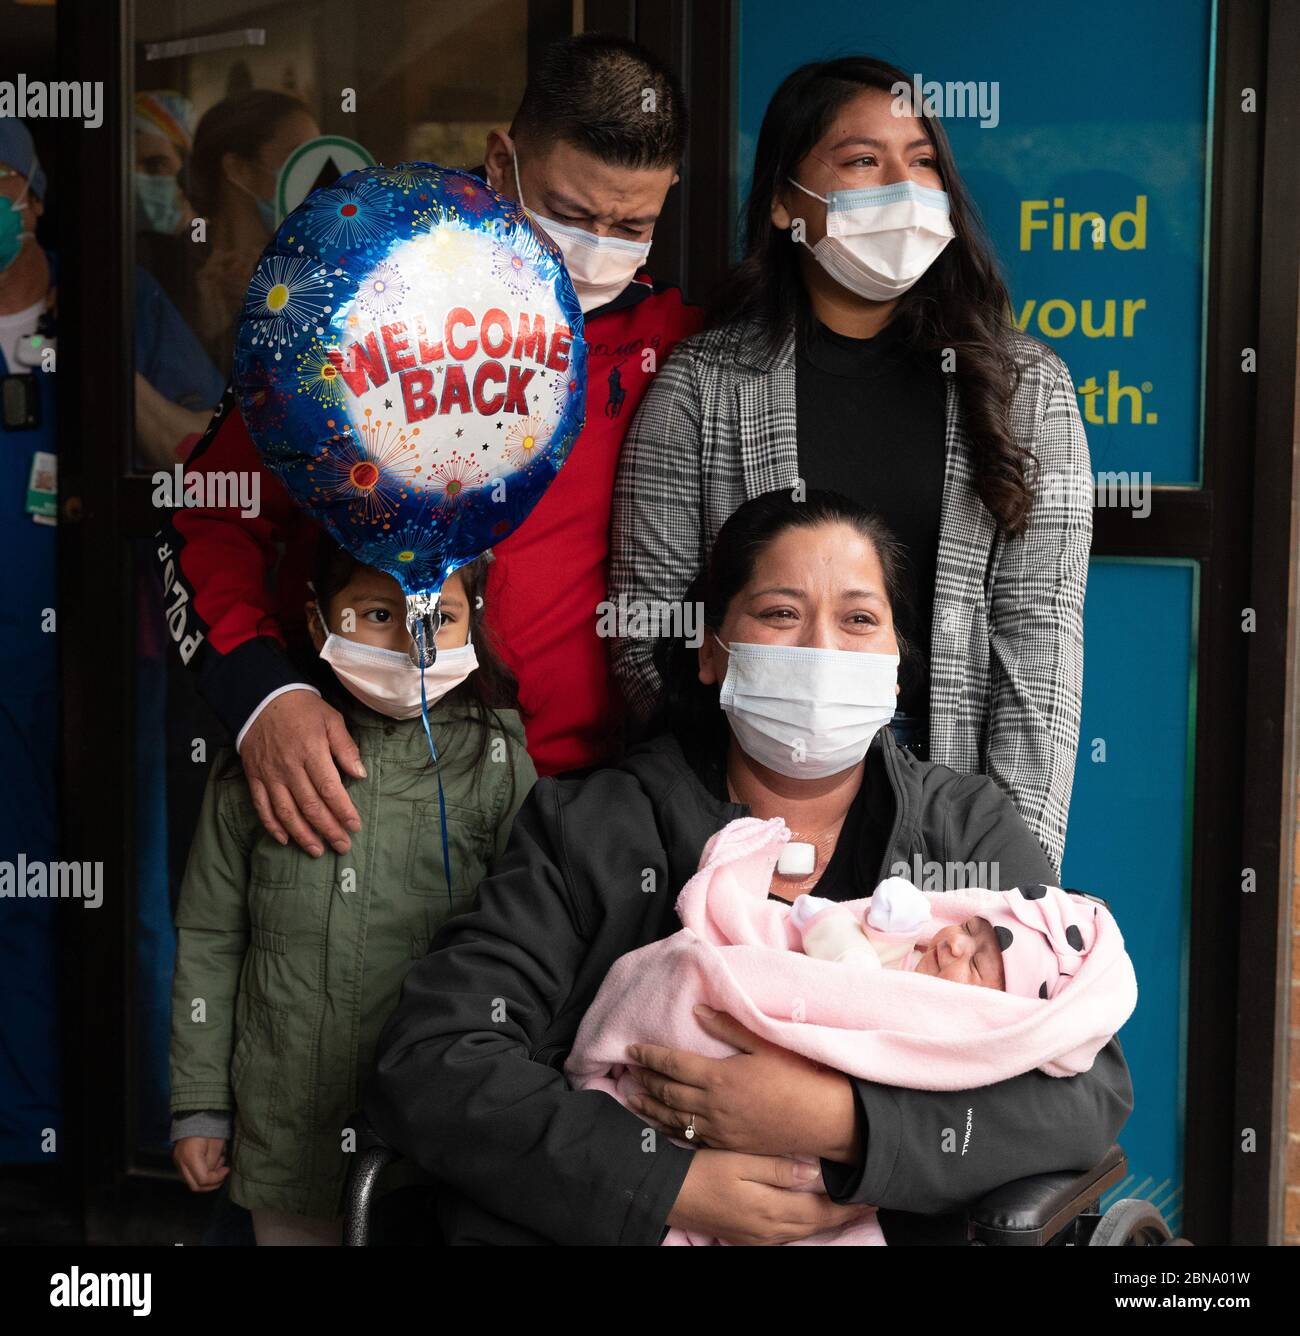 May 12, 2020, Cambridge, Massachusetts USA: Isabel Gonzalez seeing her baby Victoria for the first time, when she is discharged from COVID-19 Recovery Unit Spaulding Hospital in Cambridge. Gonzalez, 34-year old from Chelsea, MA who was pregnant when she contracted COVID-19, delivered her baby Victoria via emergency C-section at Massachustts General Hospital on March 30, when she was initially admitted. She was transferred to the ICU on April 2nd, intubated and was on a ventilator until April 26th. She was admitted to Spaulding Hospital Cambridge on May 4th and now has tested COVID negative a Stock Photo